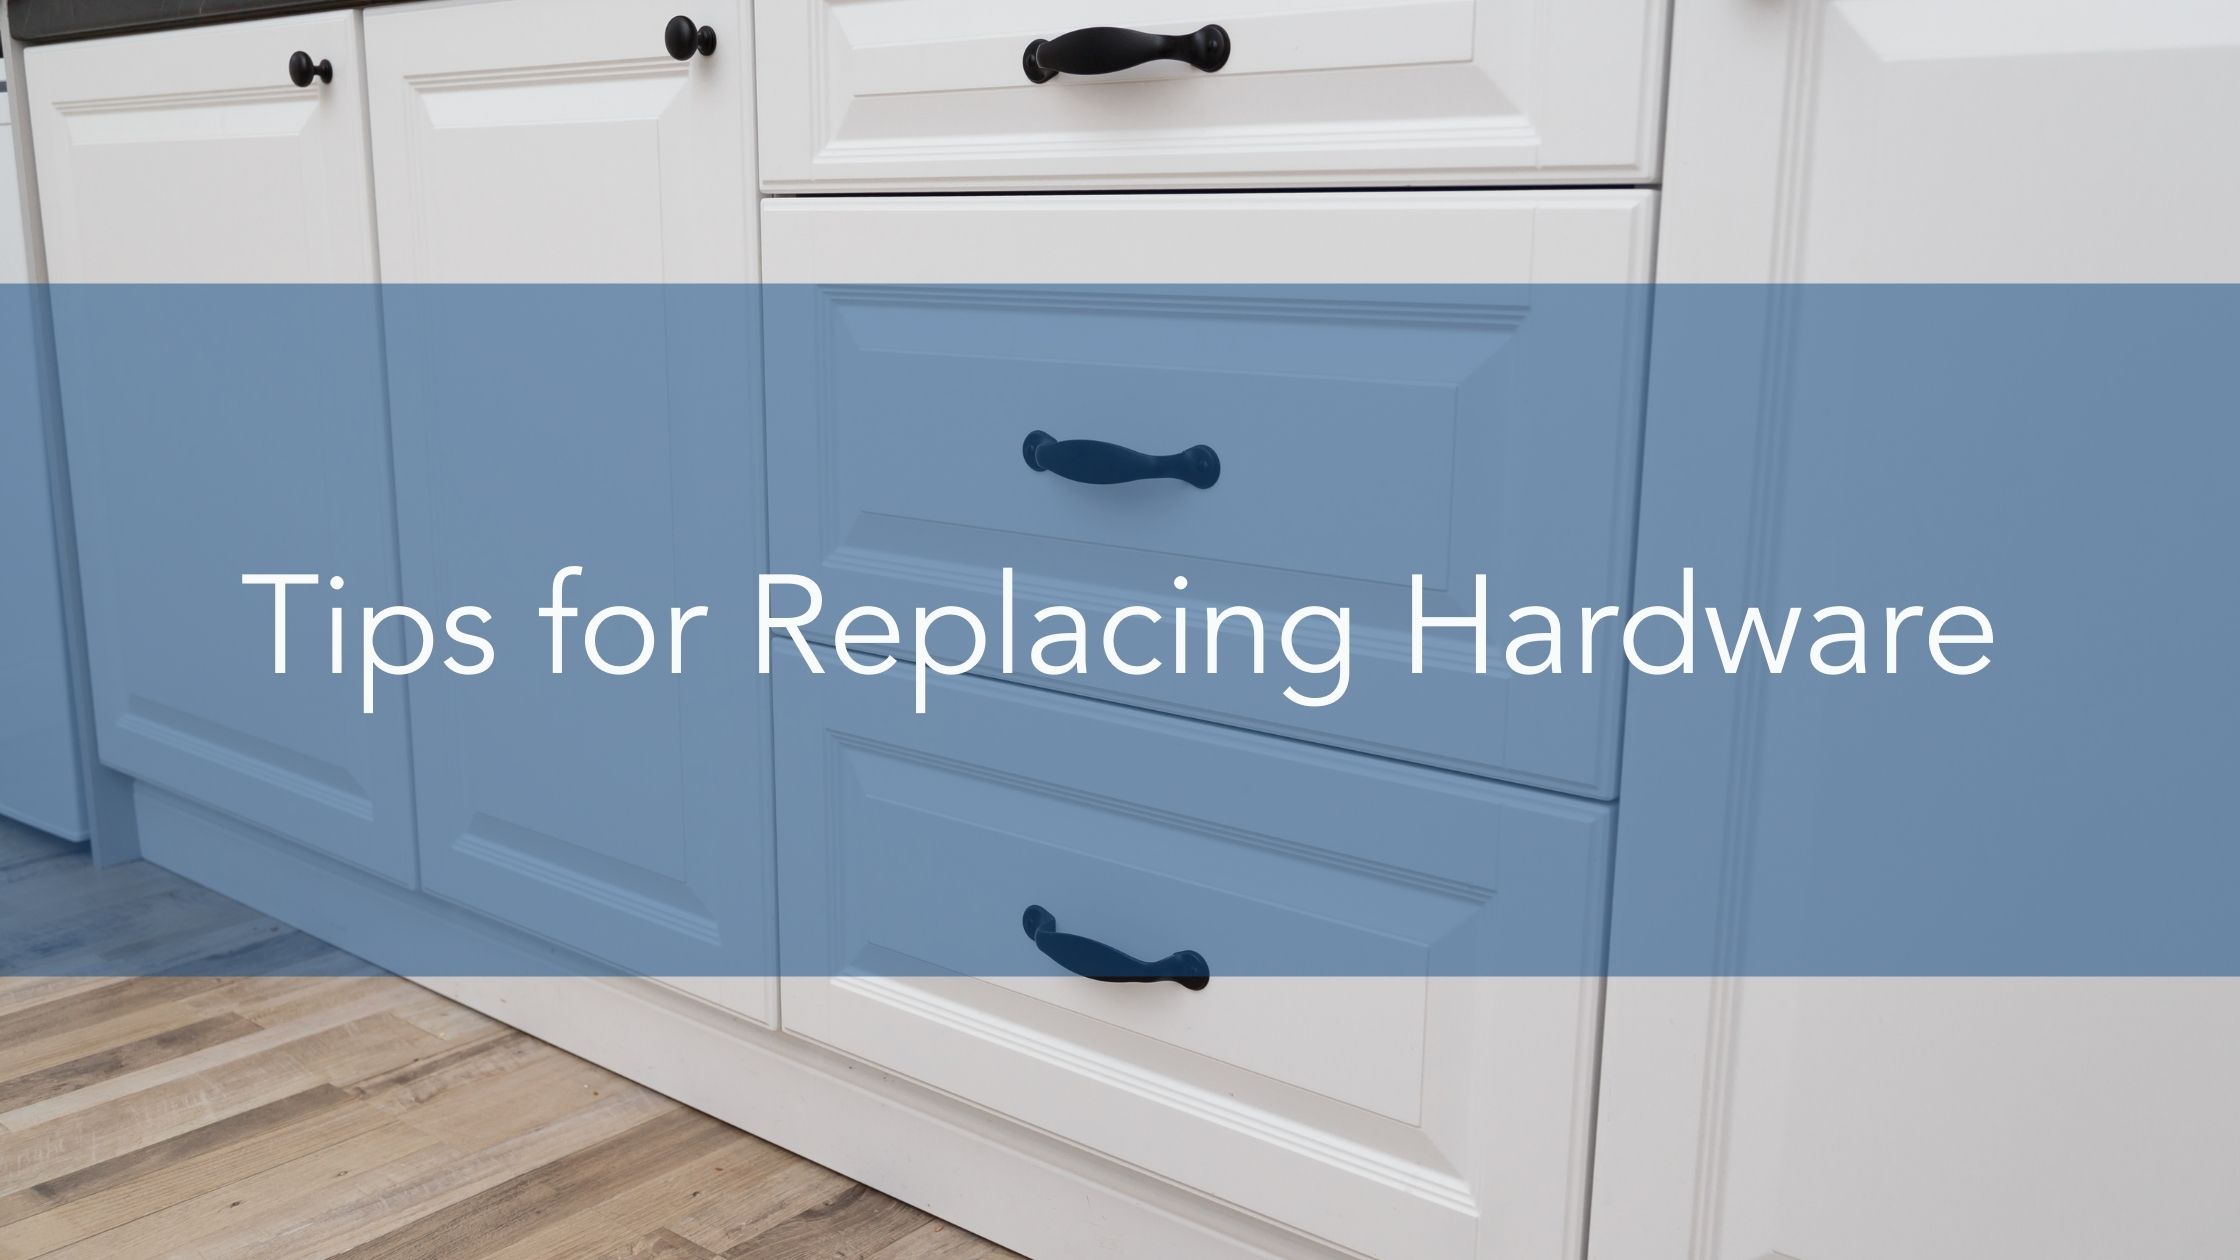 Tips for Replacing Hardware